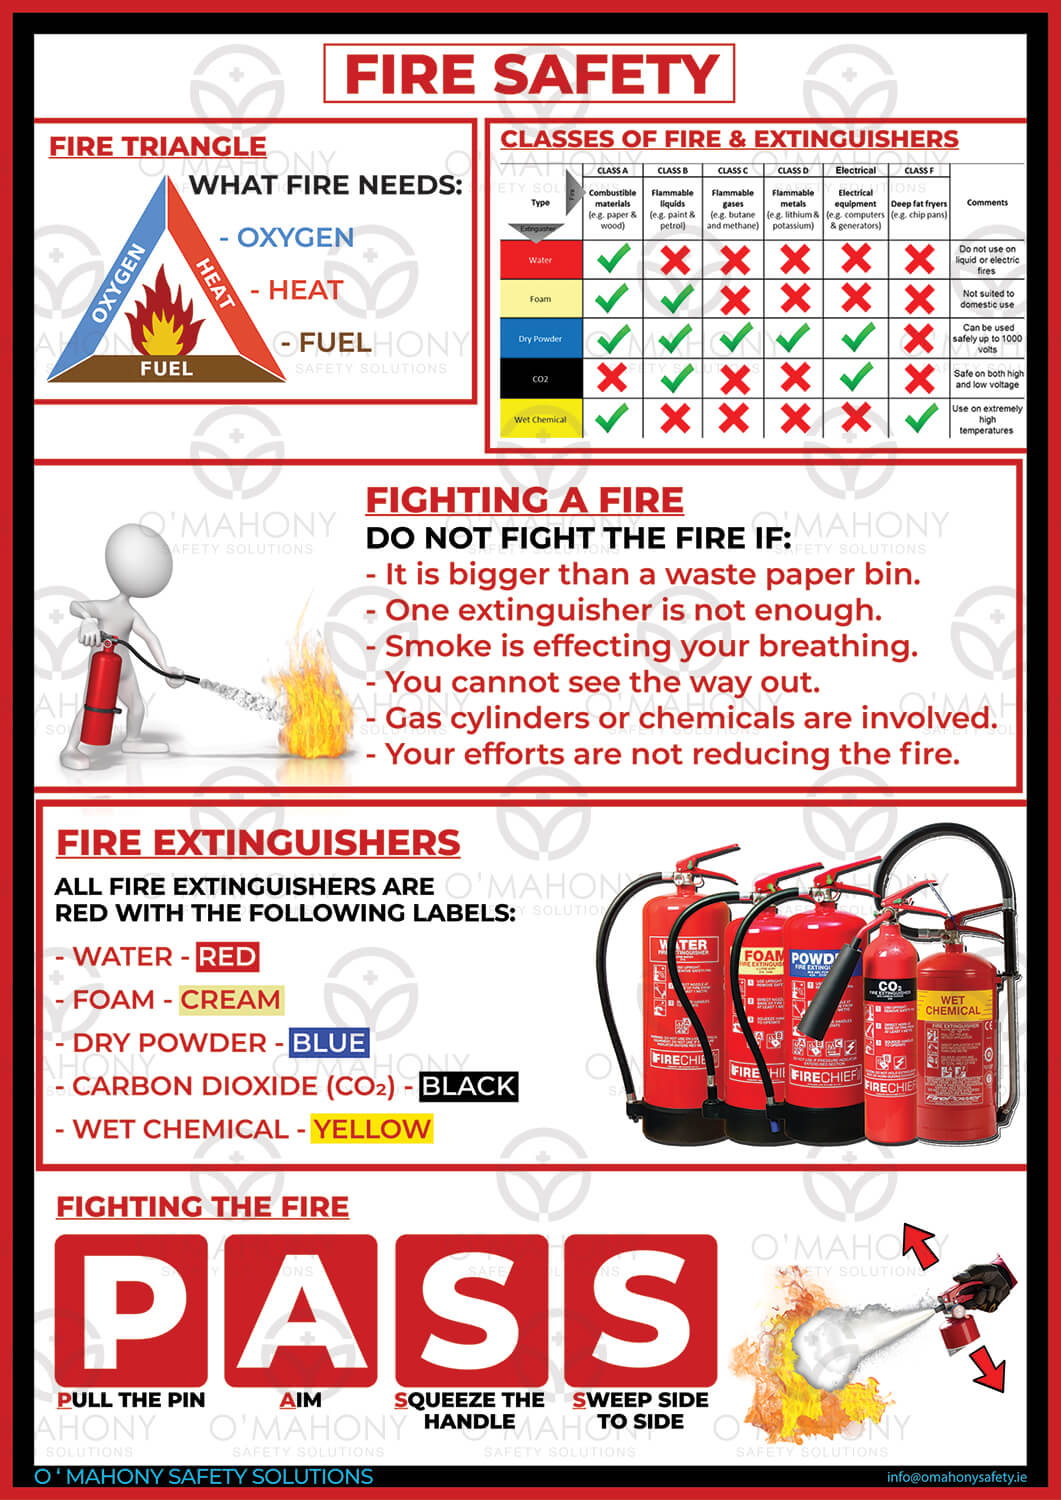 Fire Safety Poster - O'Mahony Safety Solutions